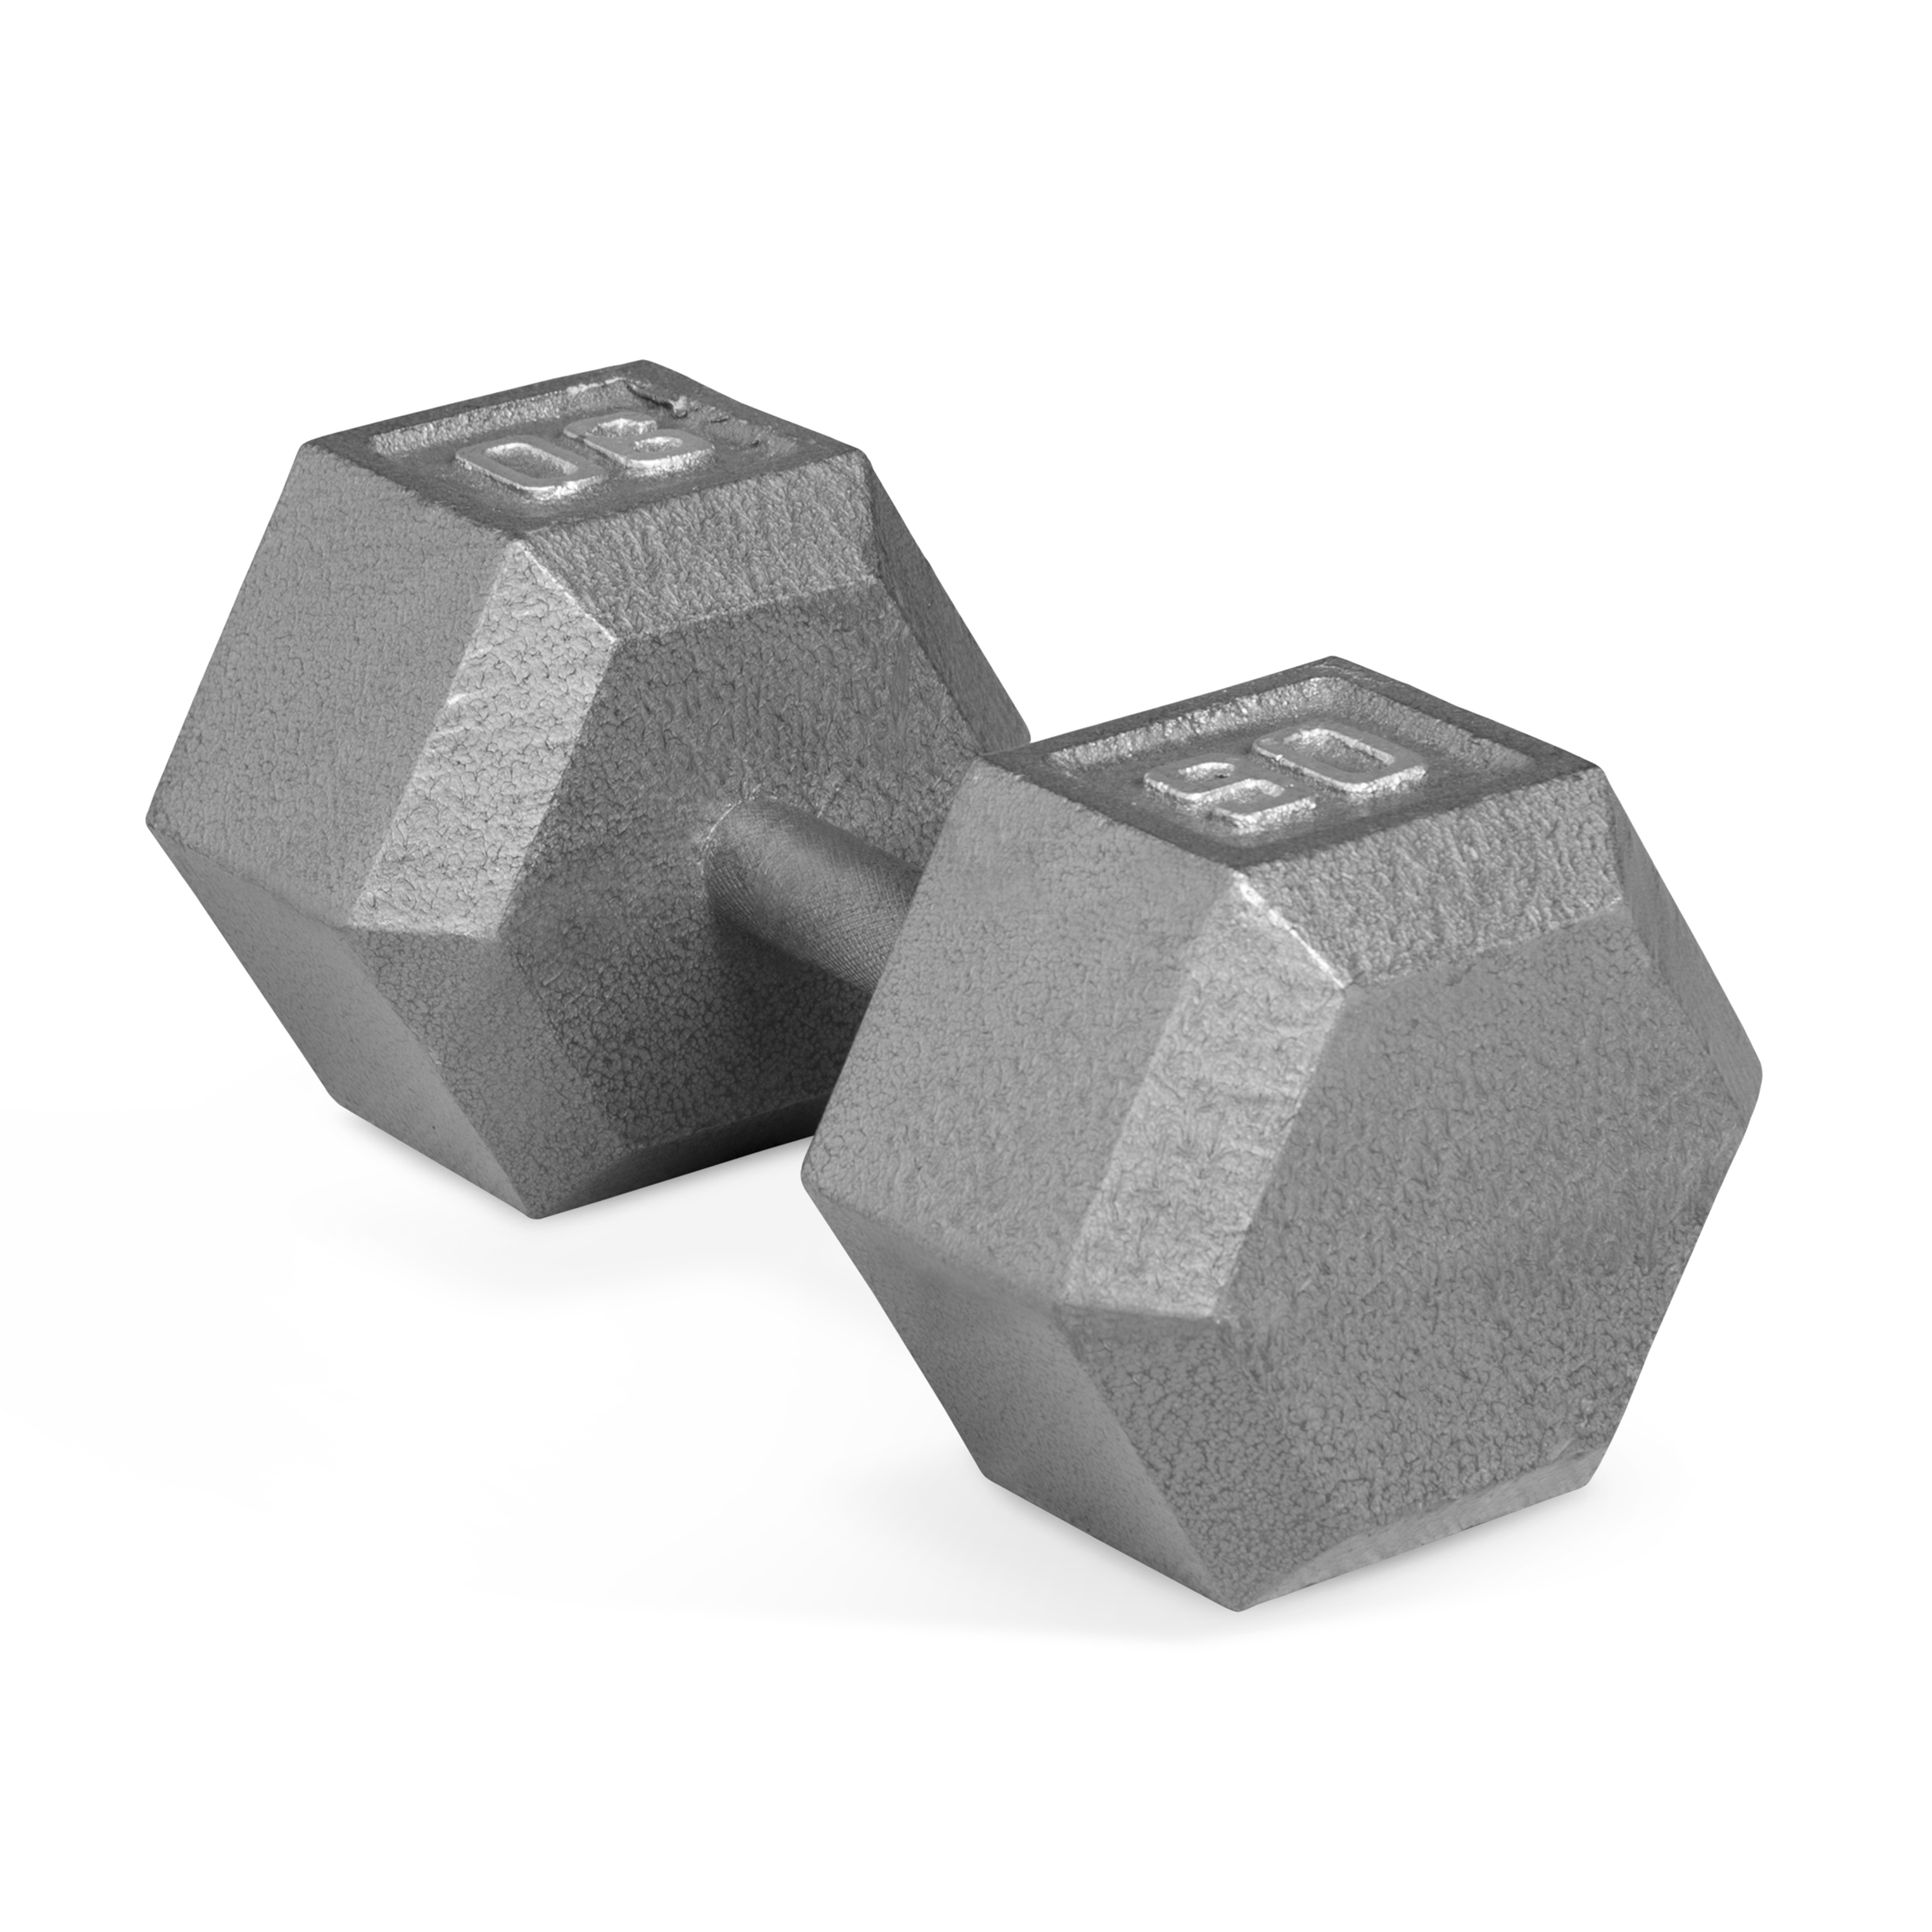 CAP Barbell 90lb Cast Iron Hex Dumbbell, Single - image 1 of 6